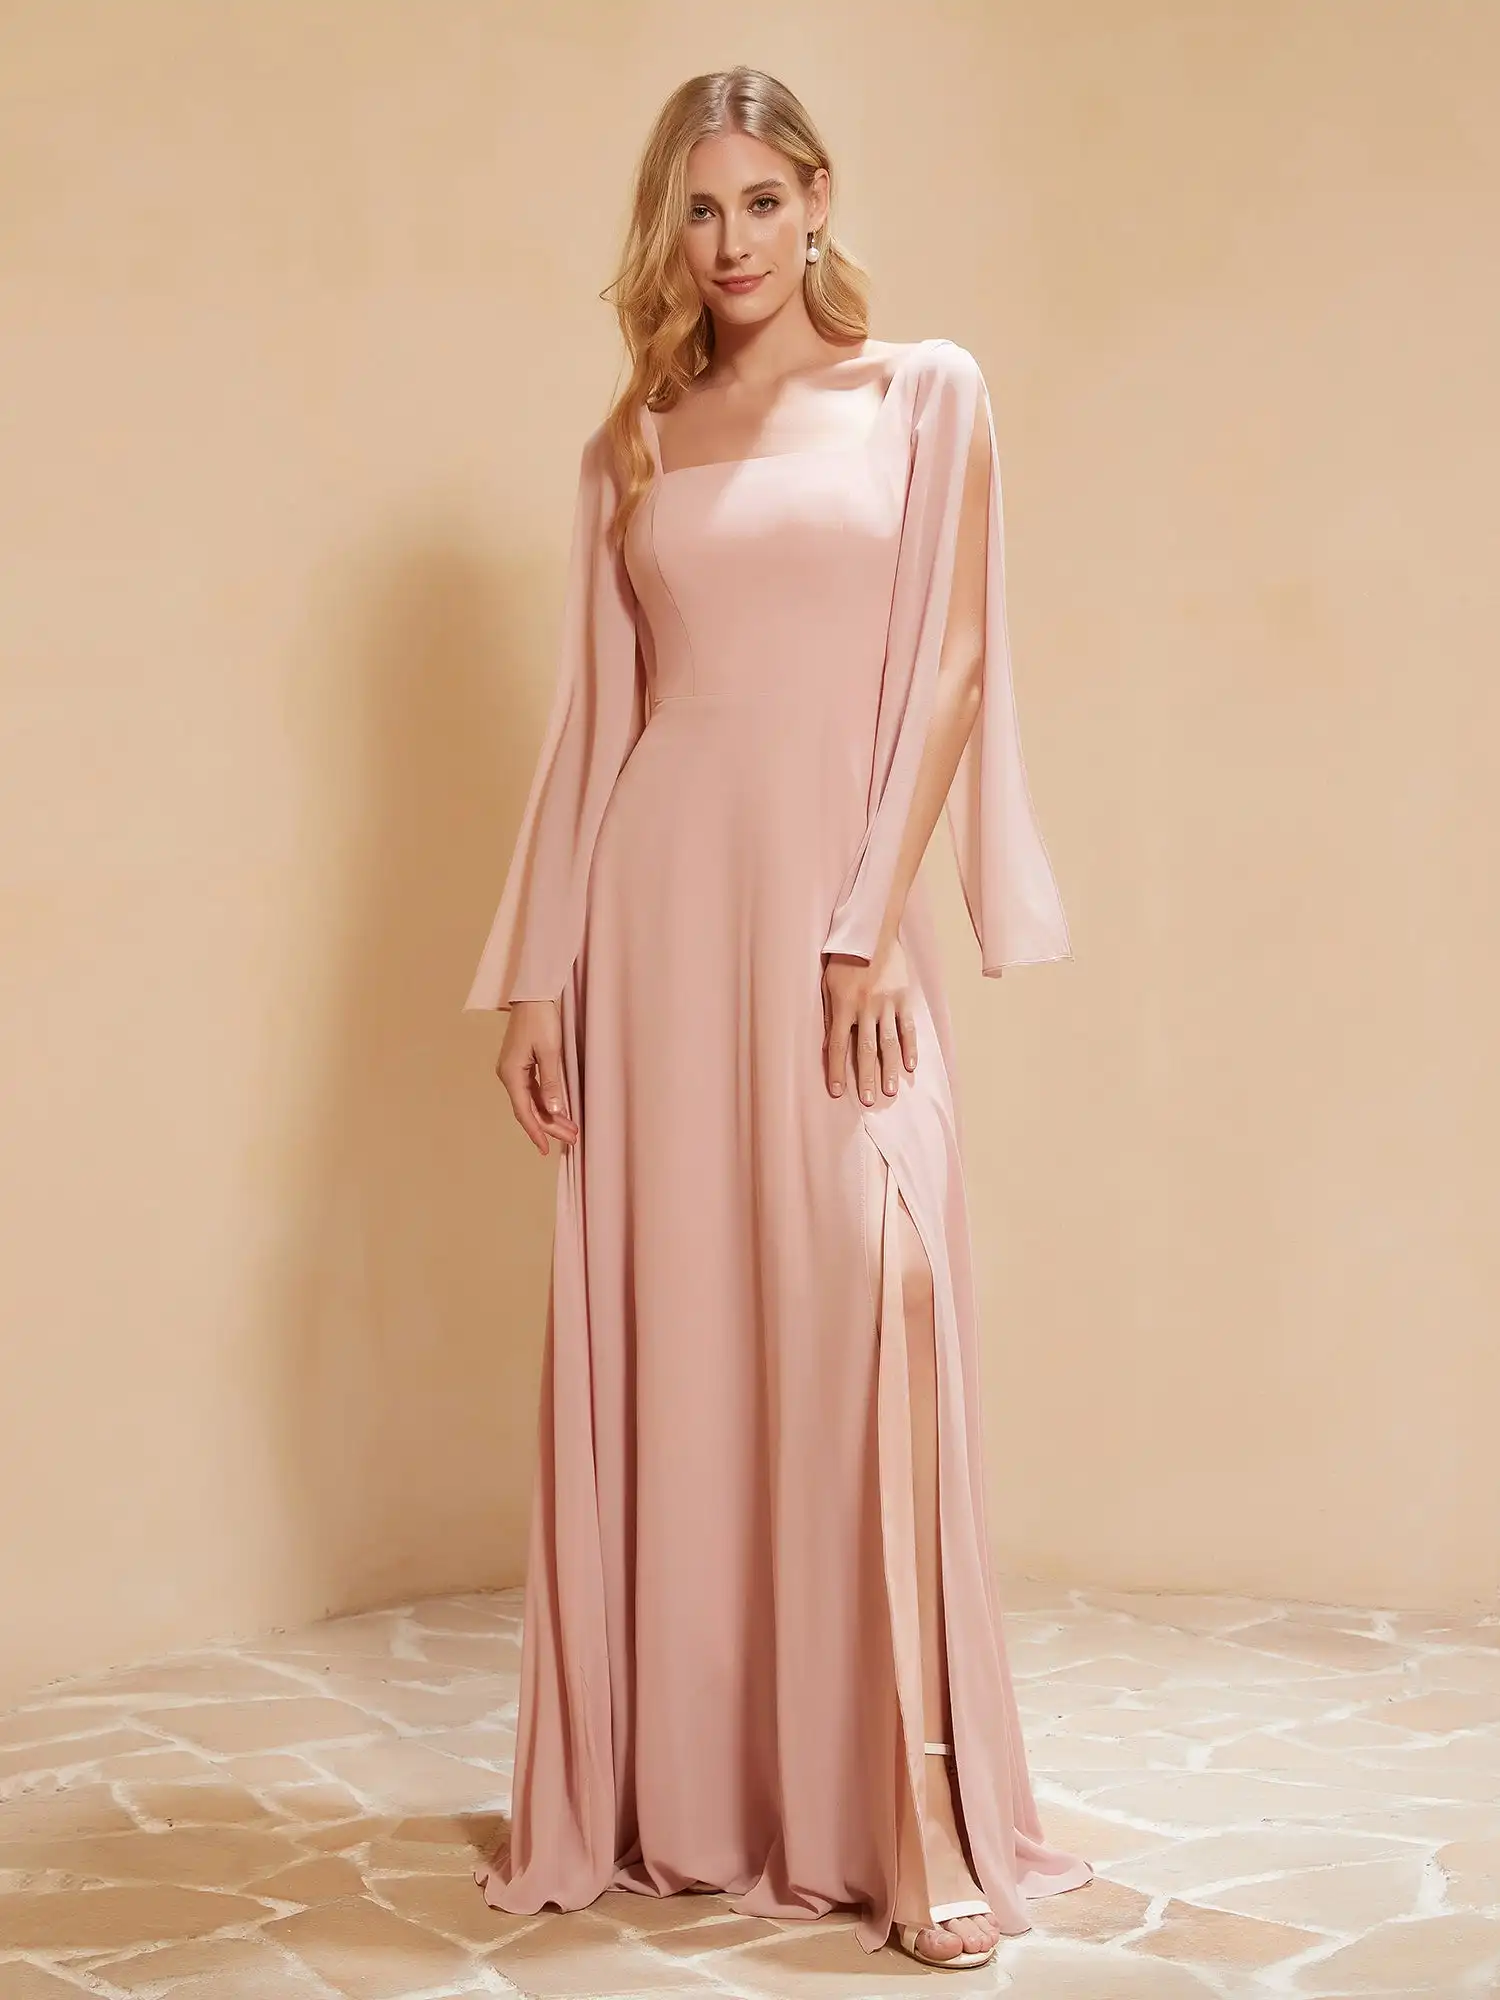 

Square Neckline Ruched Chiffon Bridesmaid Dress With Slit A-line Flutter Sleeves Wedding Cocktail Dresses Pleated Evening Gowns